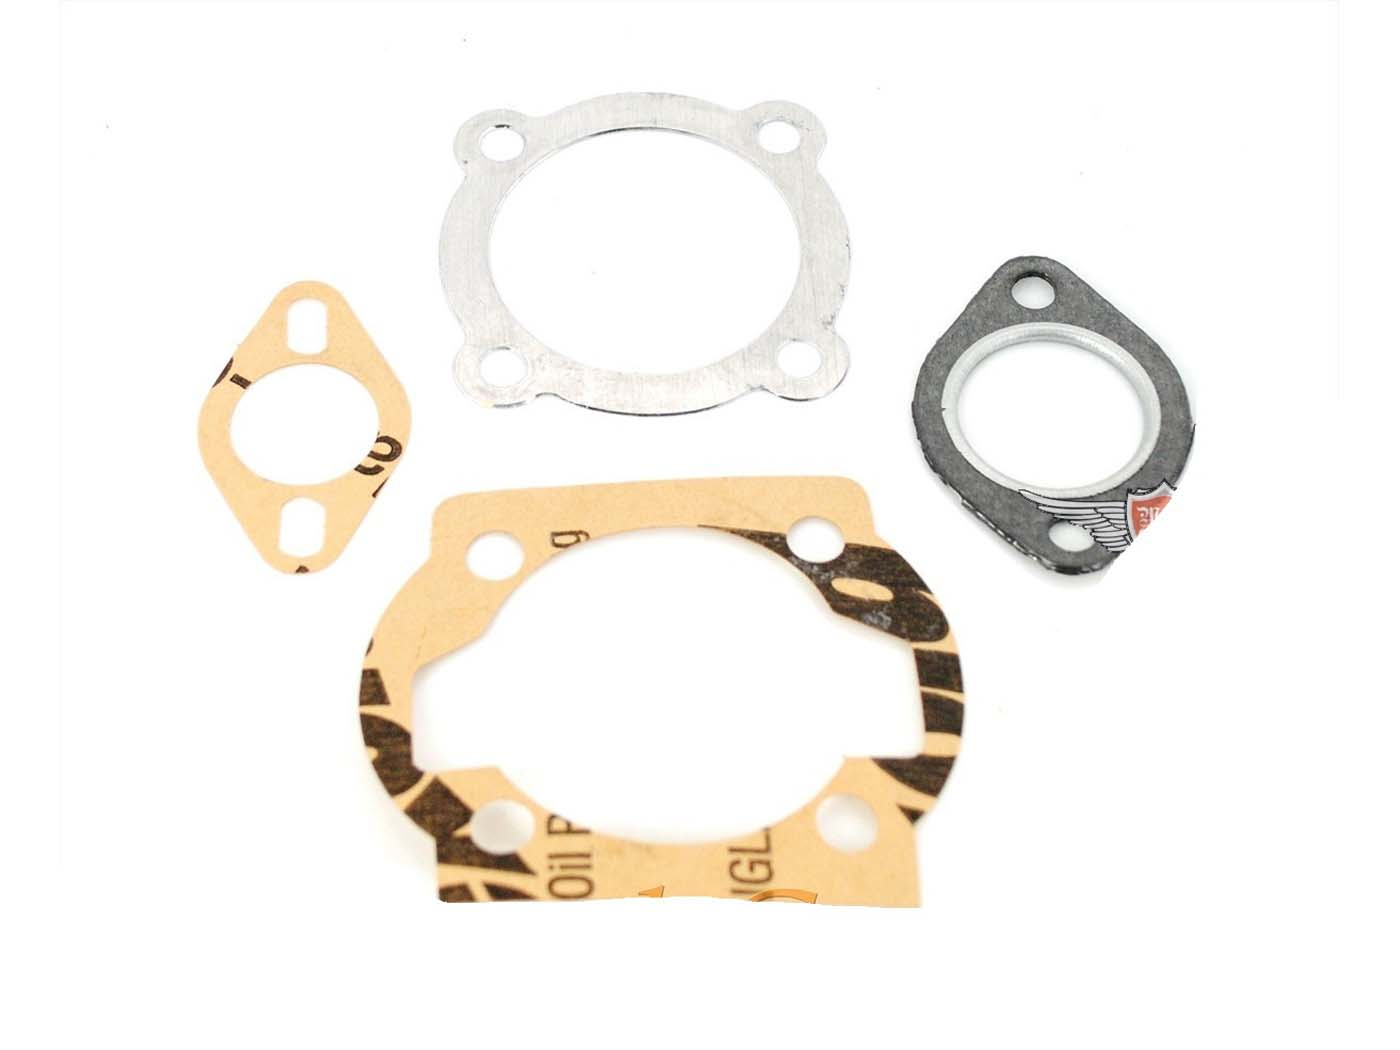 Gasket Set Moped 4 Pieces 46mm For Puch Maxi Moped Cobra